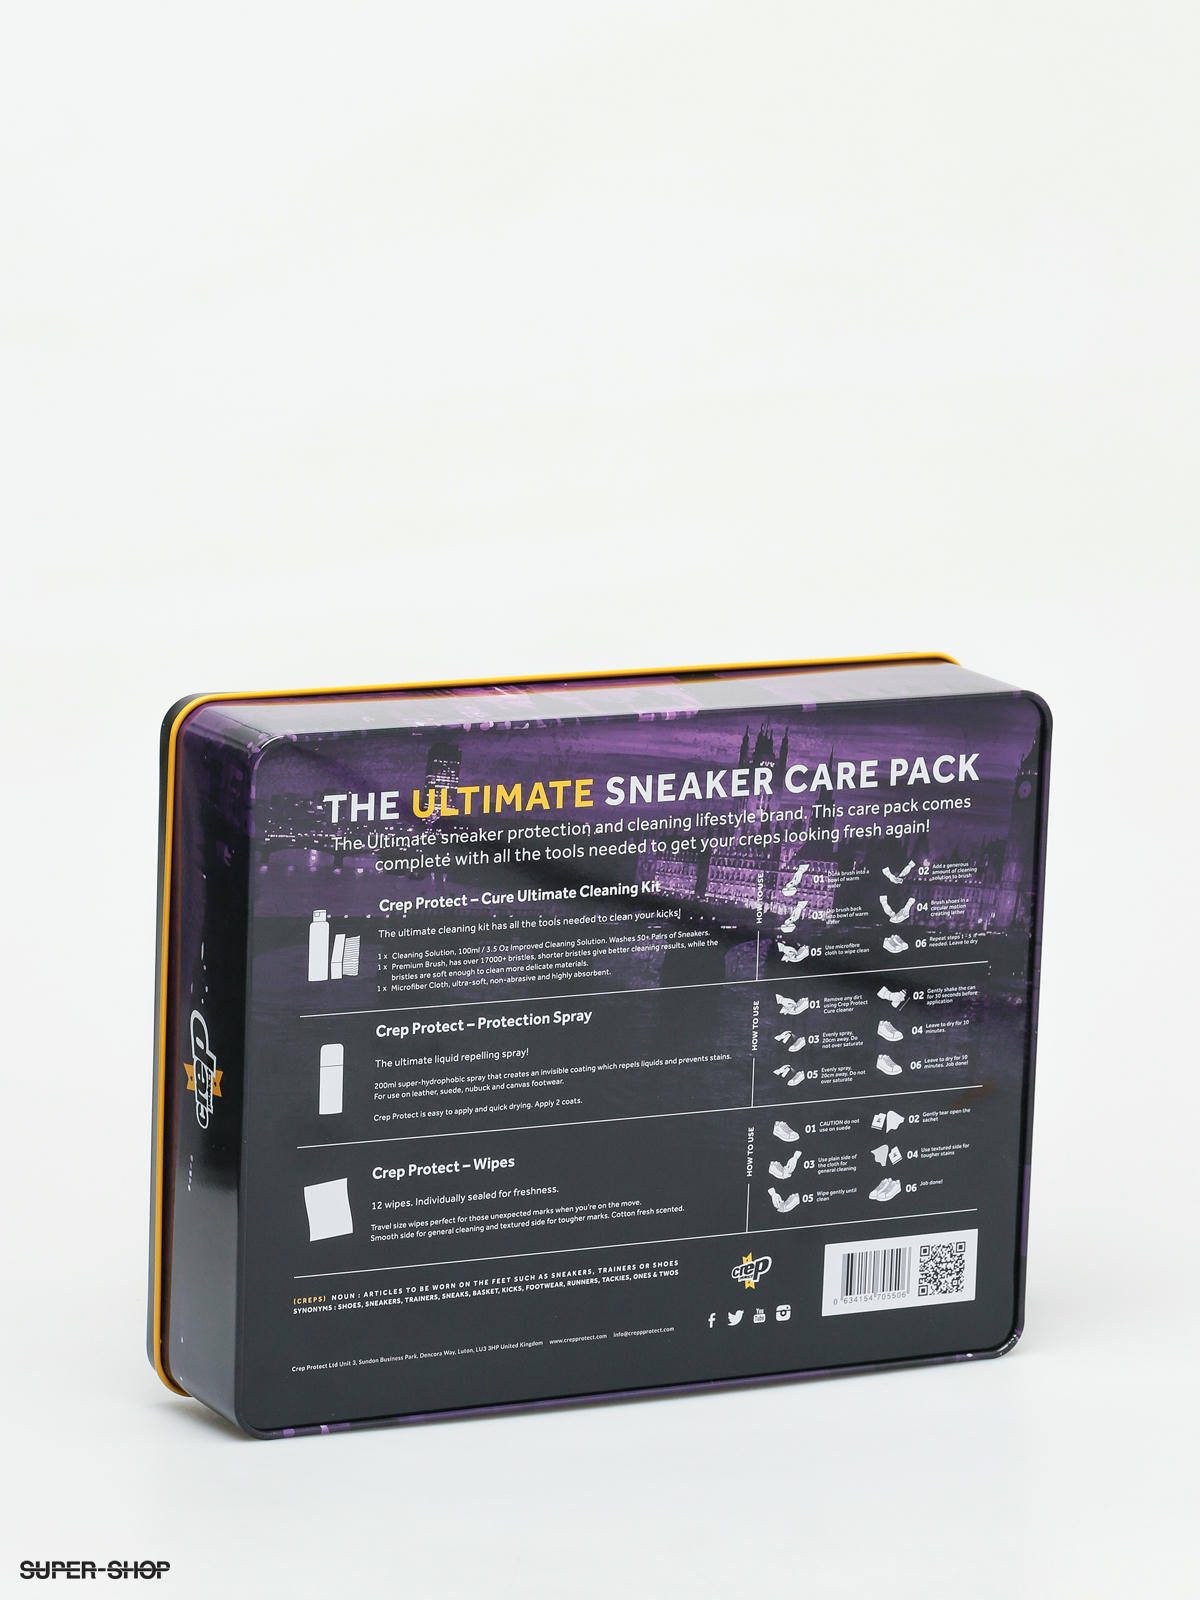 Crep Protect The Ultimate Sneaker Care Pack